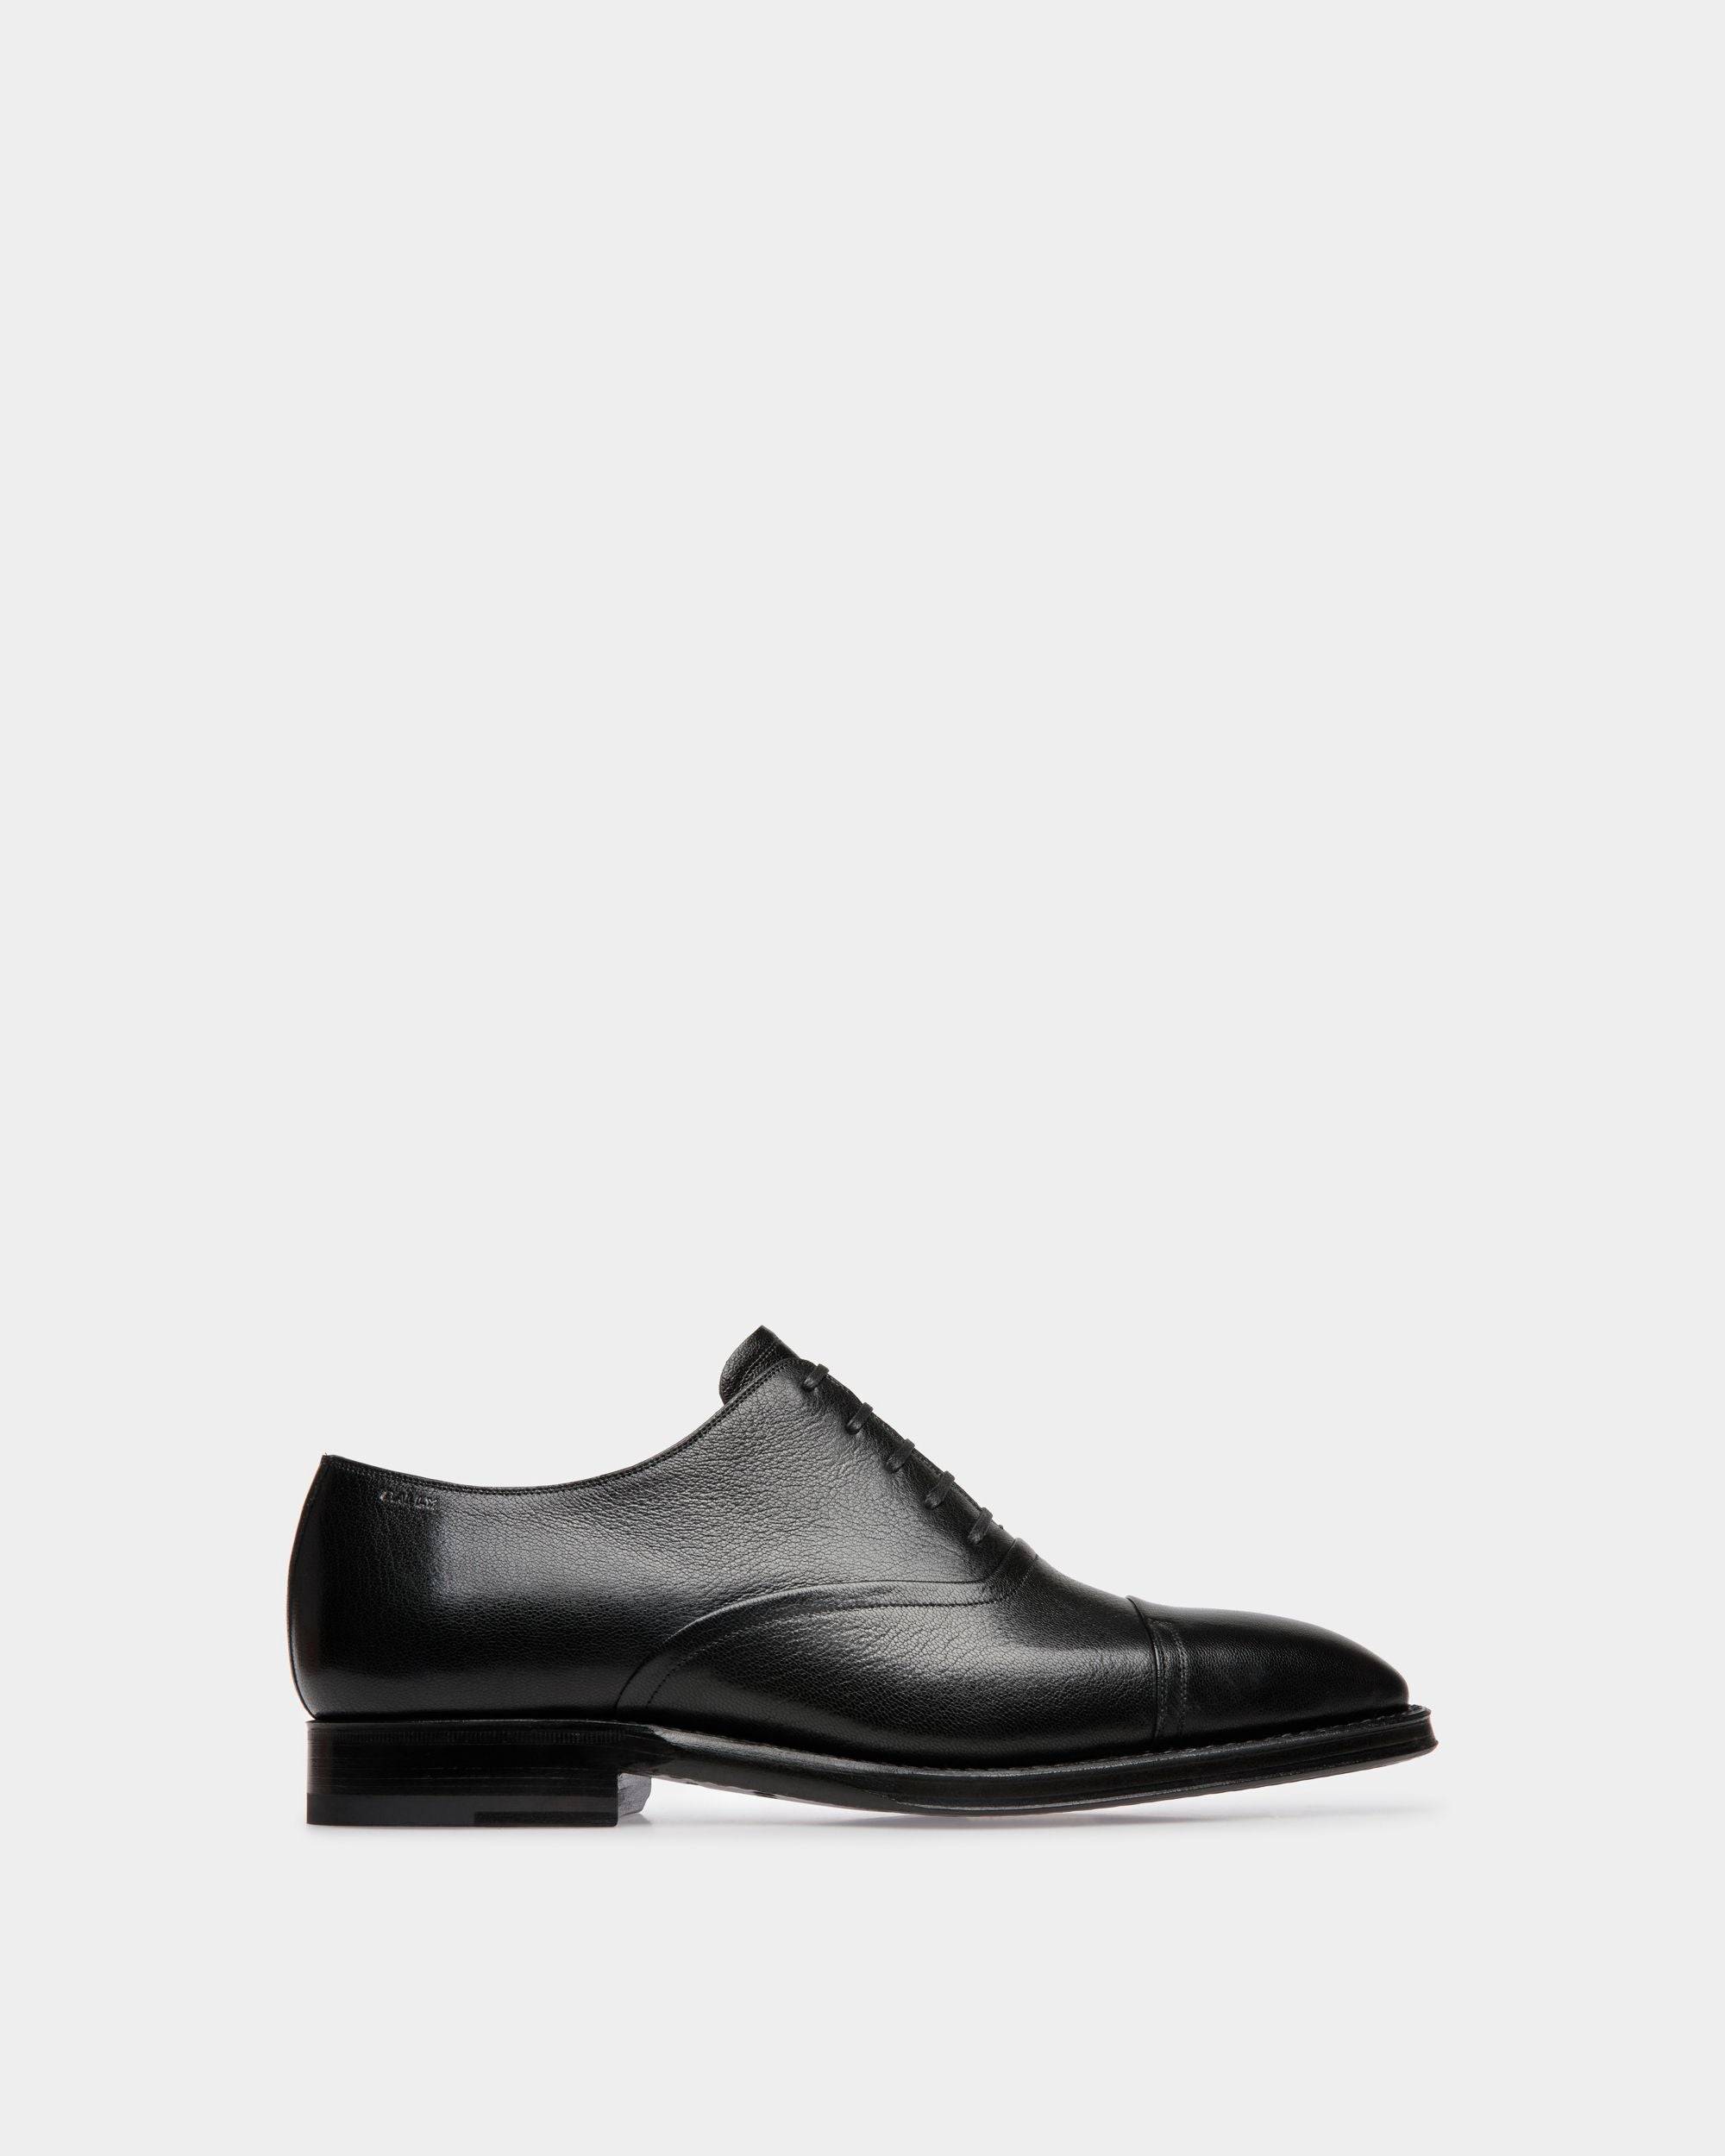 Men's Luxury Leather Lace-up Shoes & Monk Straps | Bally